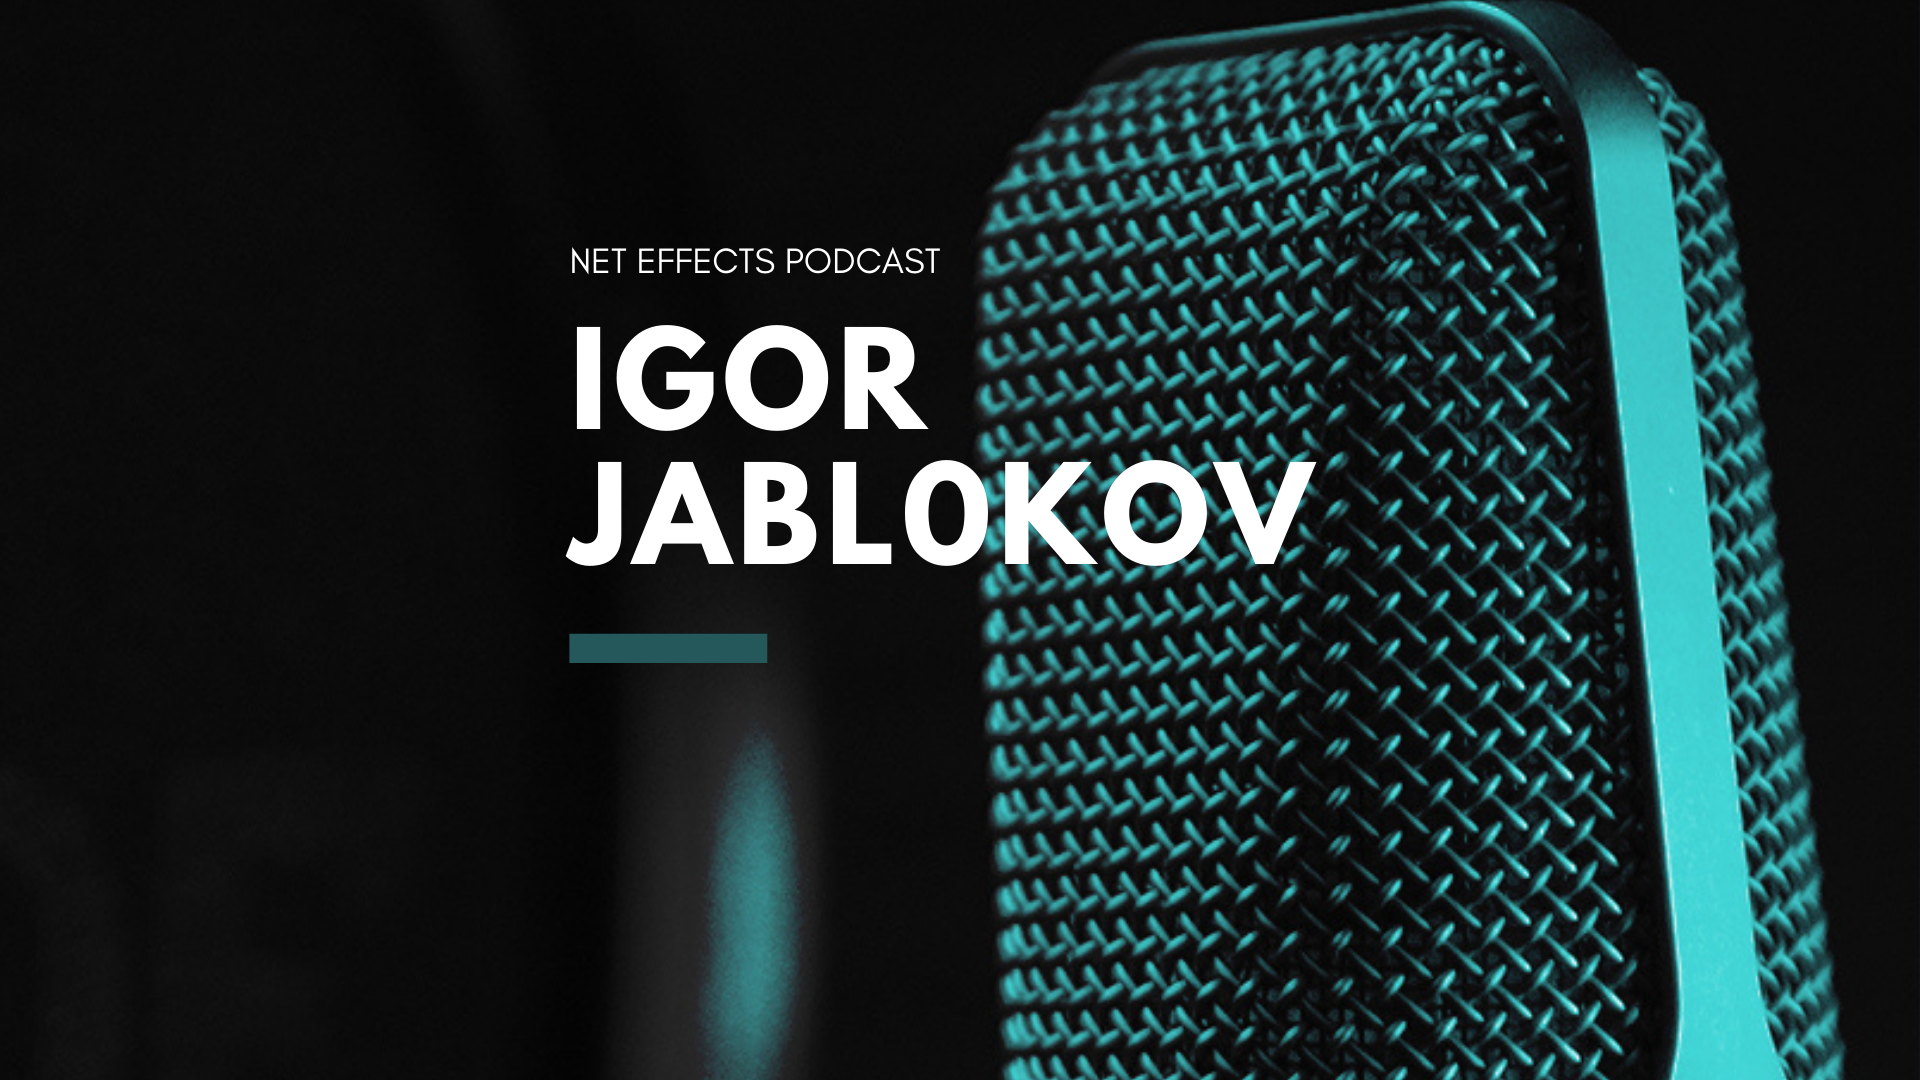 Episode 8: Featuring Igor Jablokov, Founder and CEO of Pryon